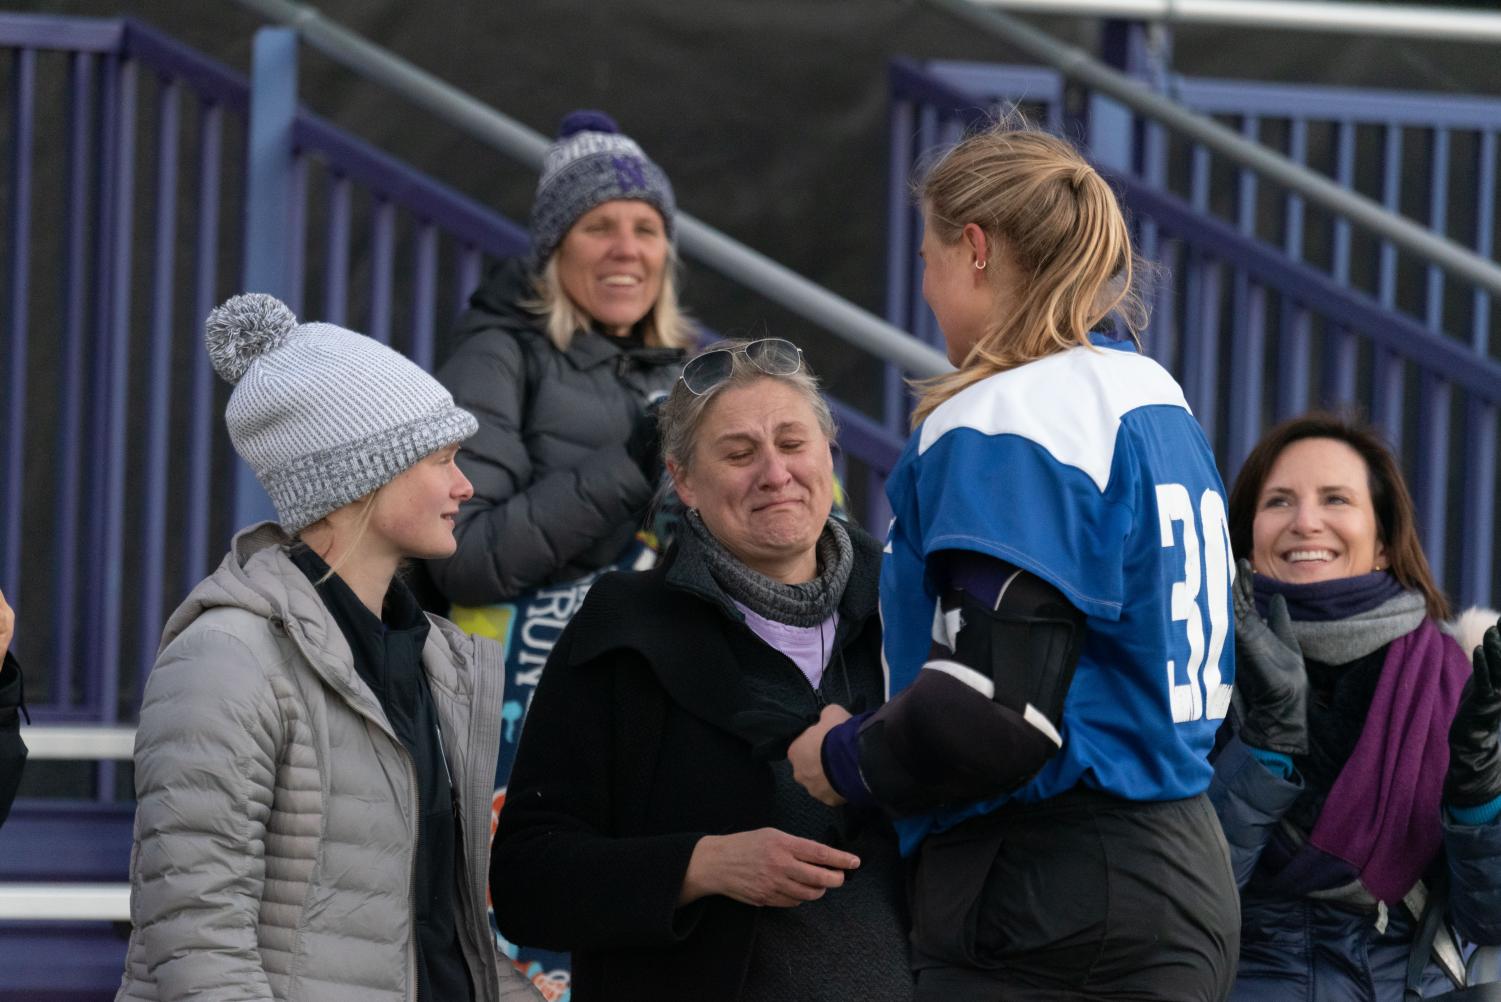 A person standing next to a field hockey player smiles while crying.